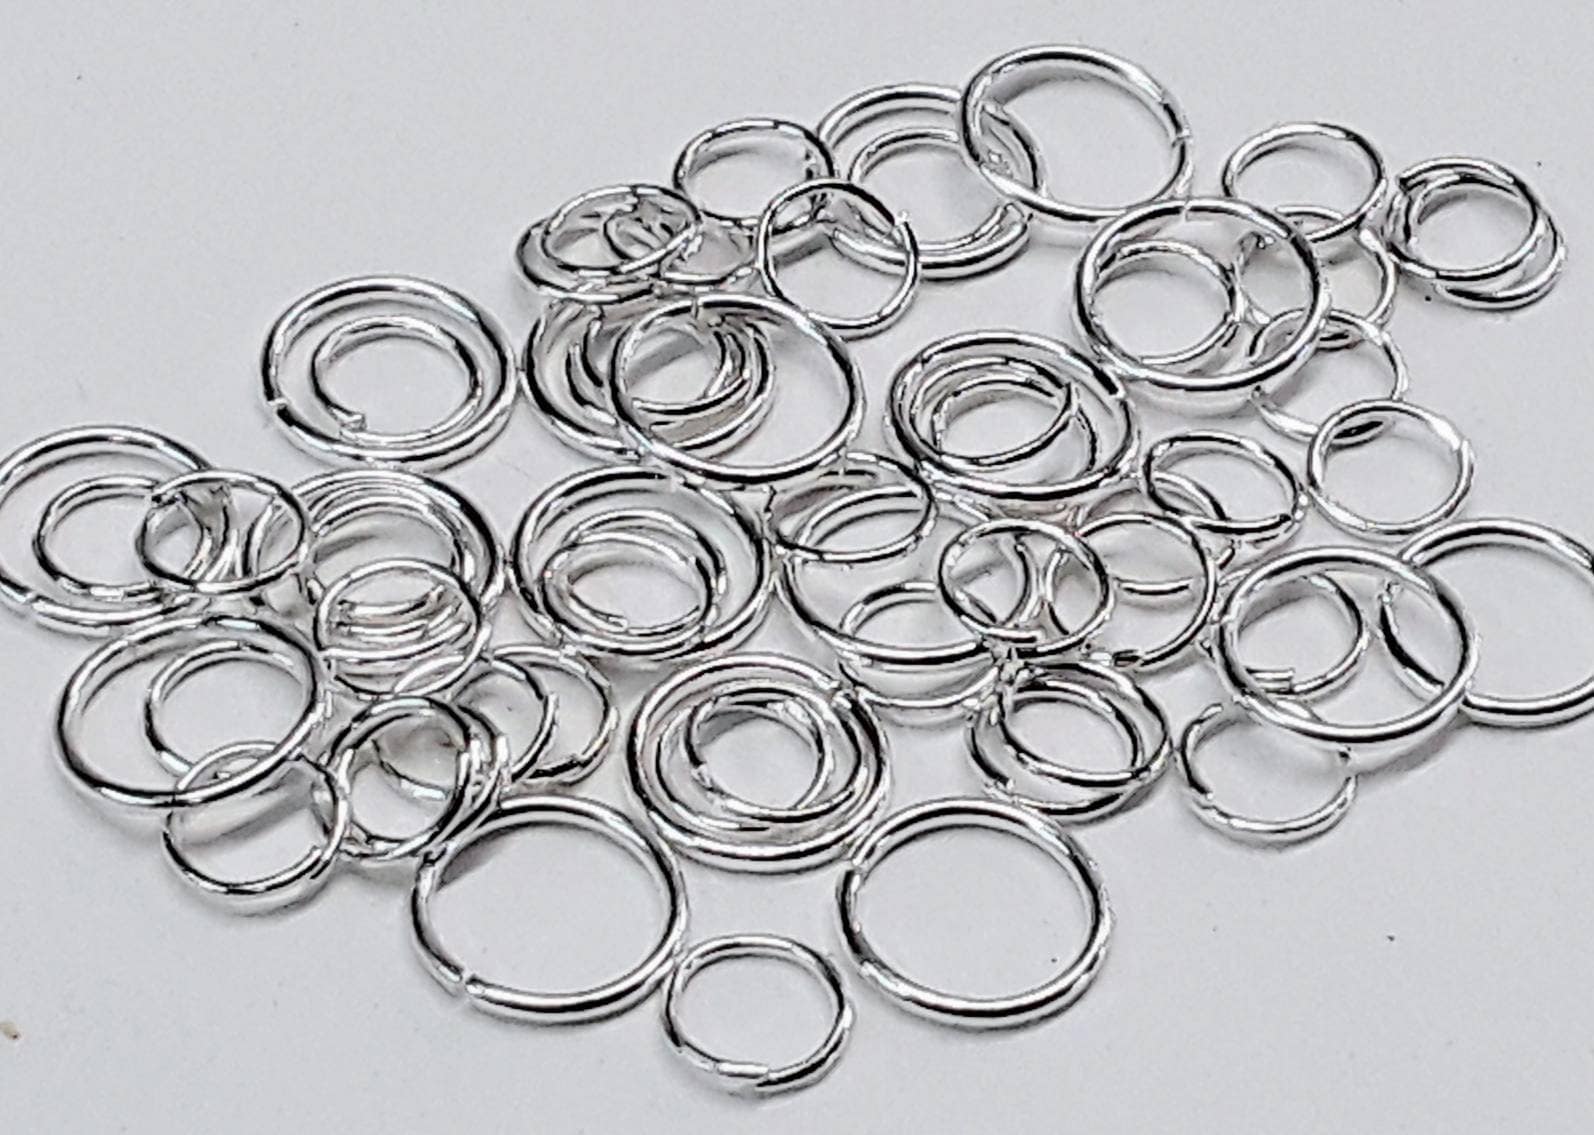 1500Pcs Mixed 6 Sizes Open Jump Rings 4mm 5mm 6mm 7mm 8mm 10mm